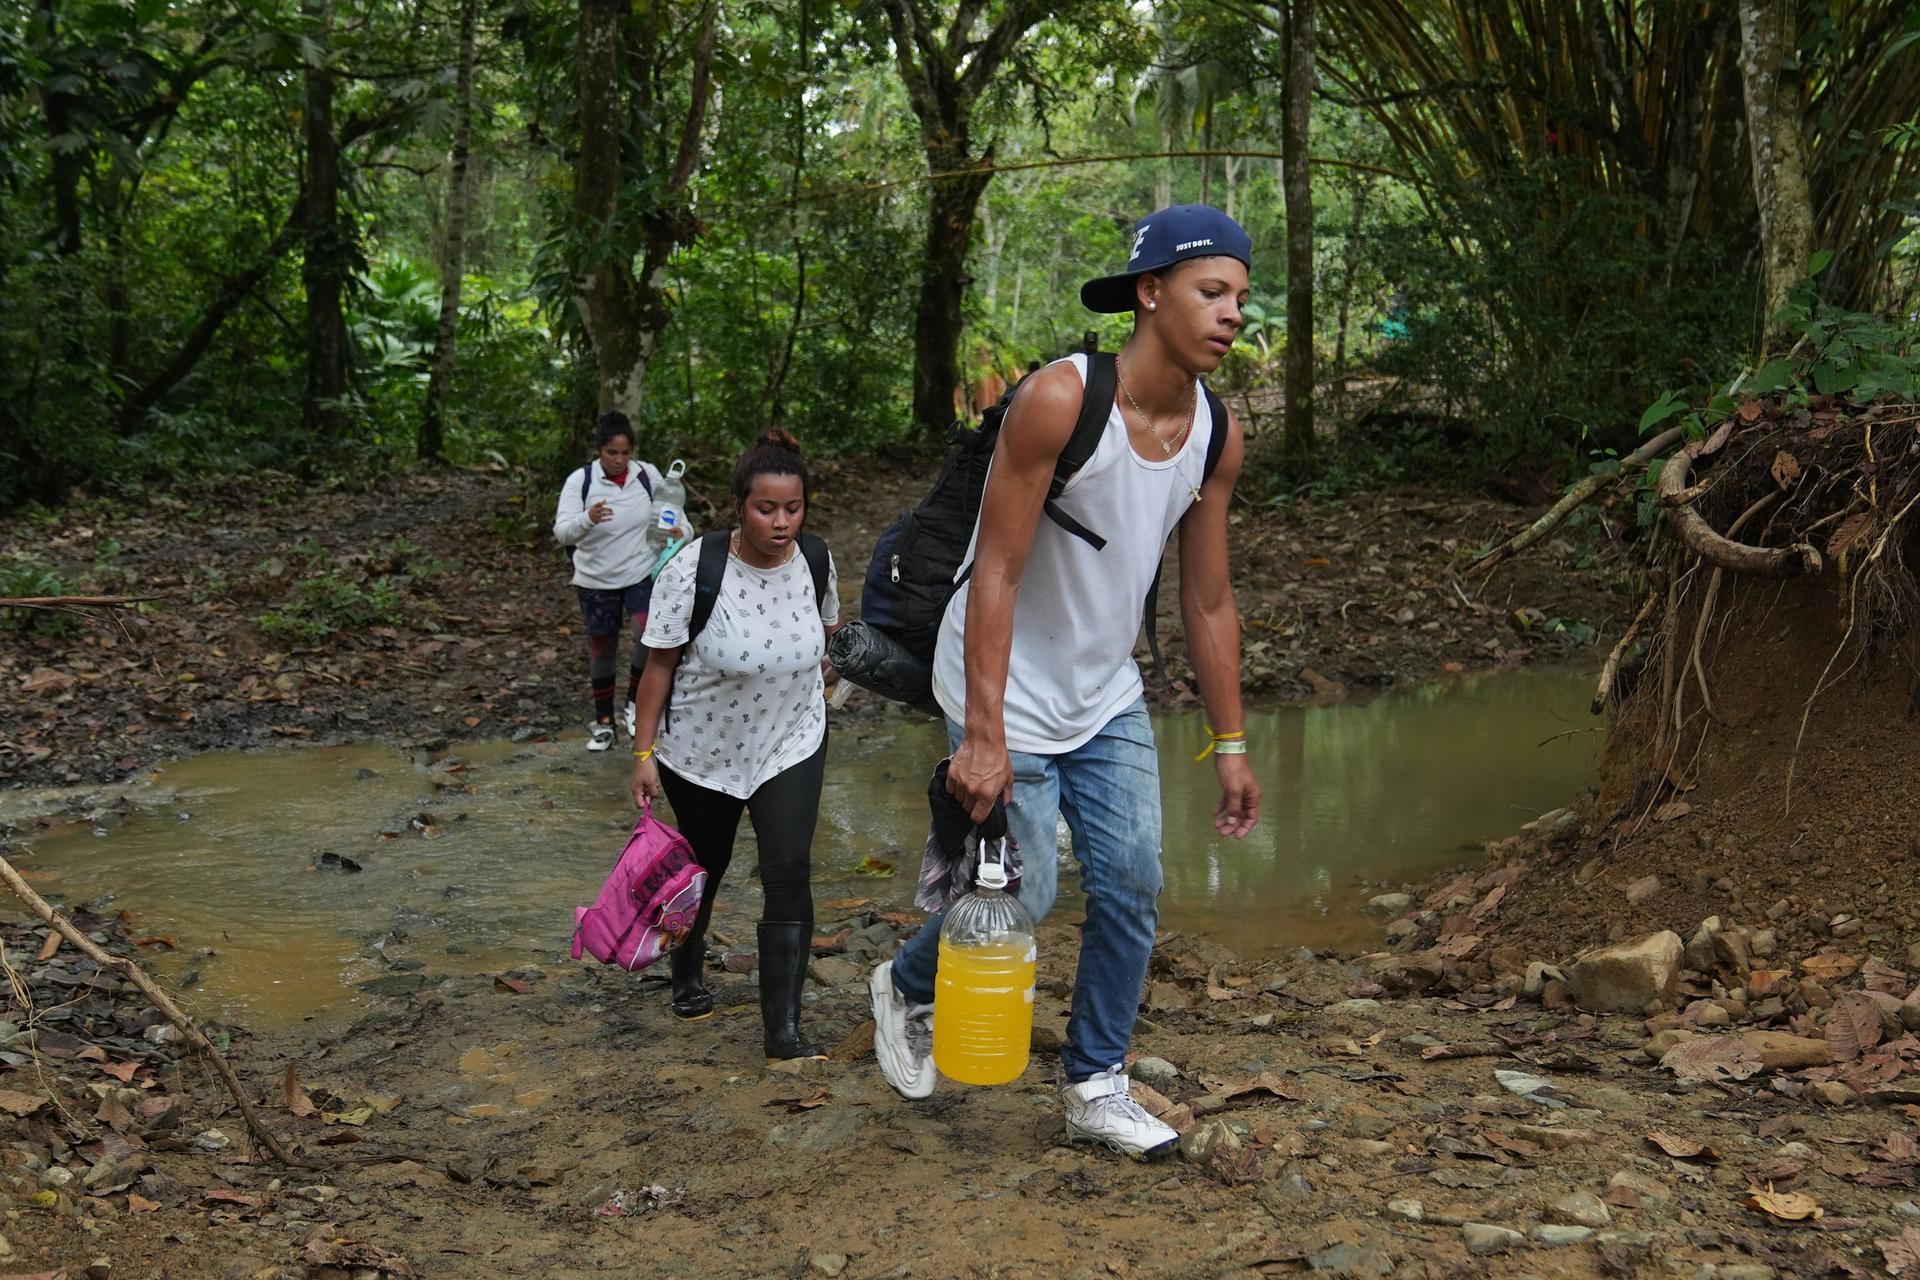 Three people cross a ravine as they walk through a forest with water bottles and backpacks.